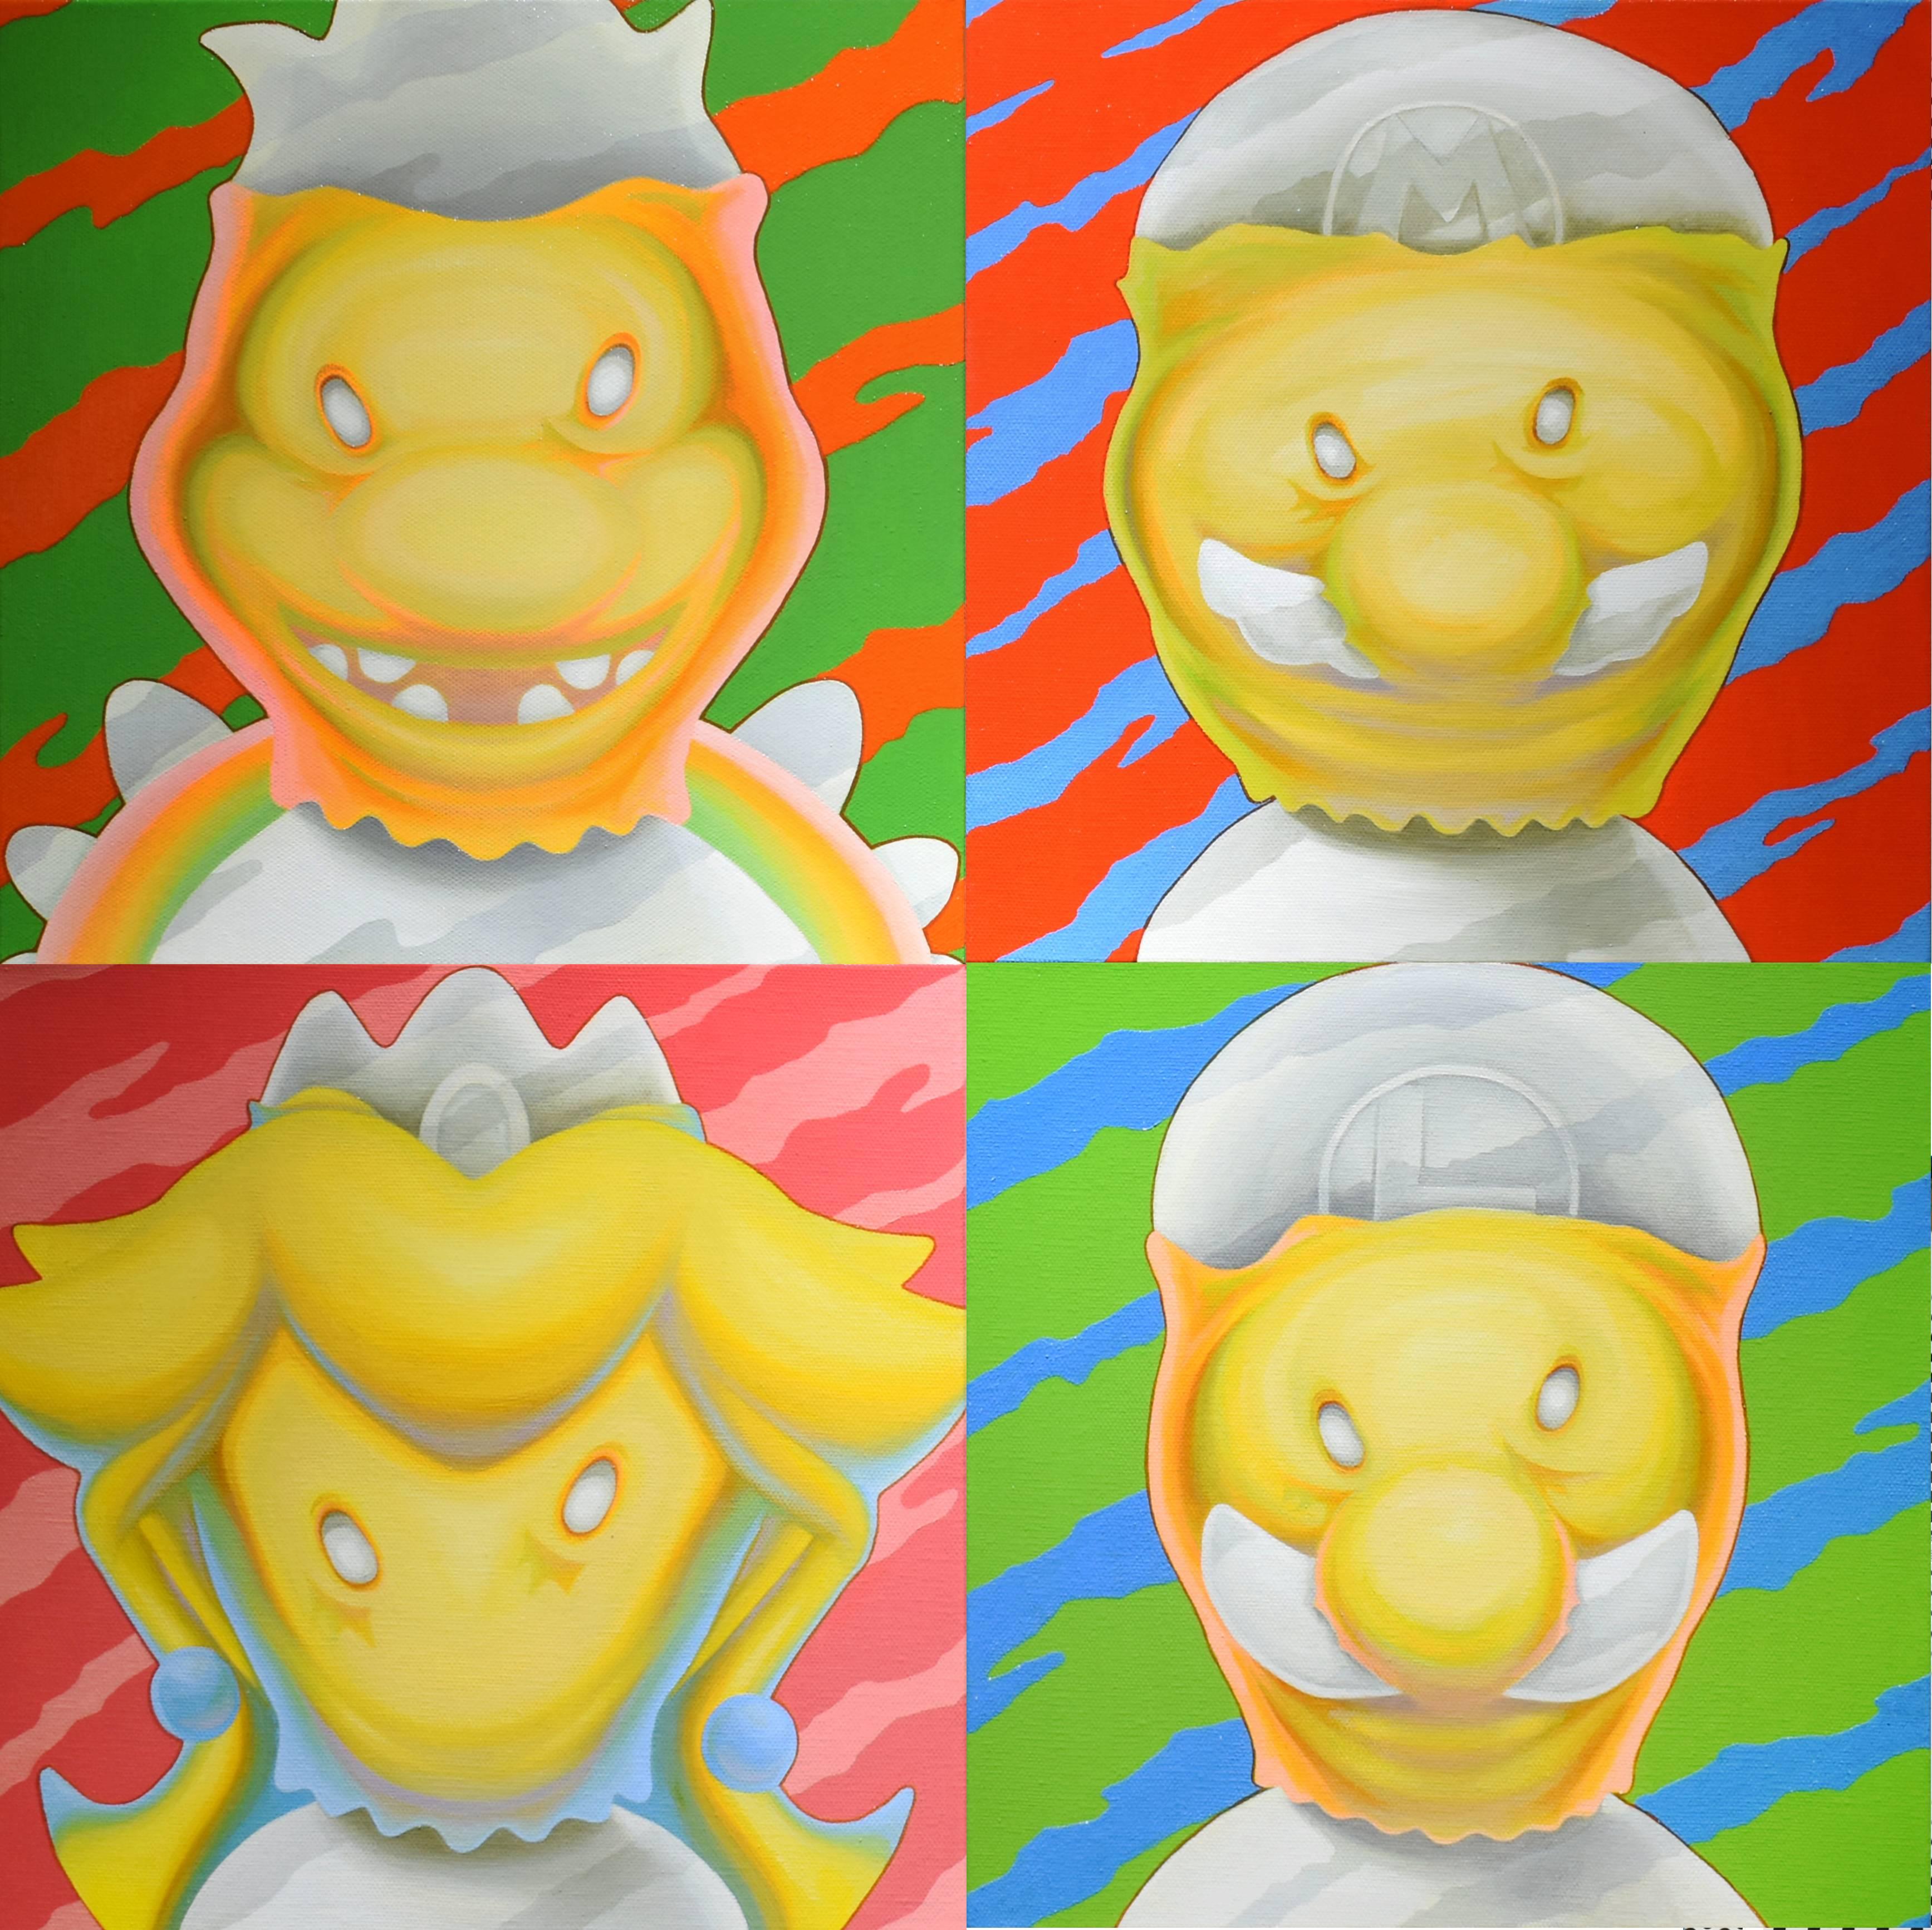 Chris Tan Portrait Painting - Look Back Classic. Inspired By Super Mario. Quadriptych Painted in Pop Art.